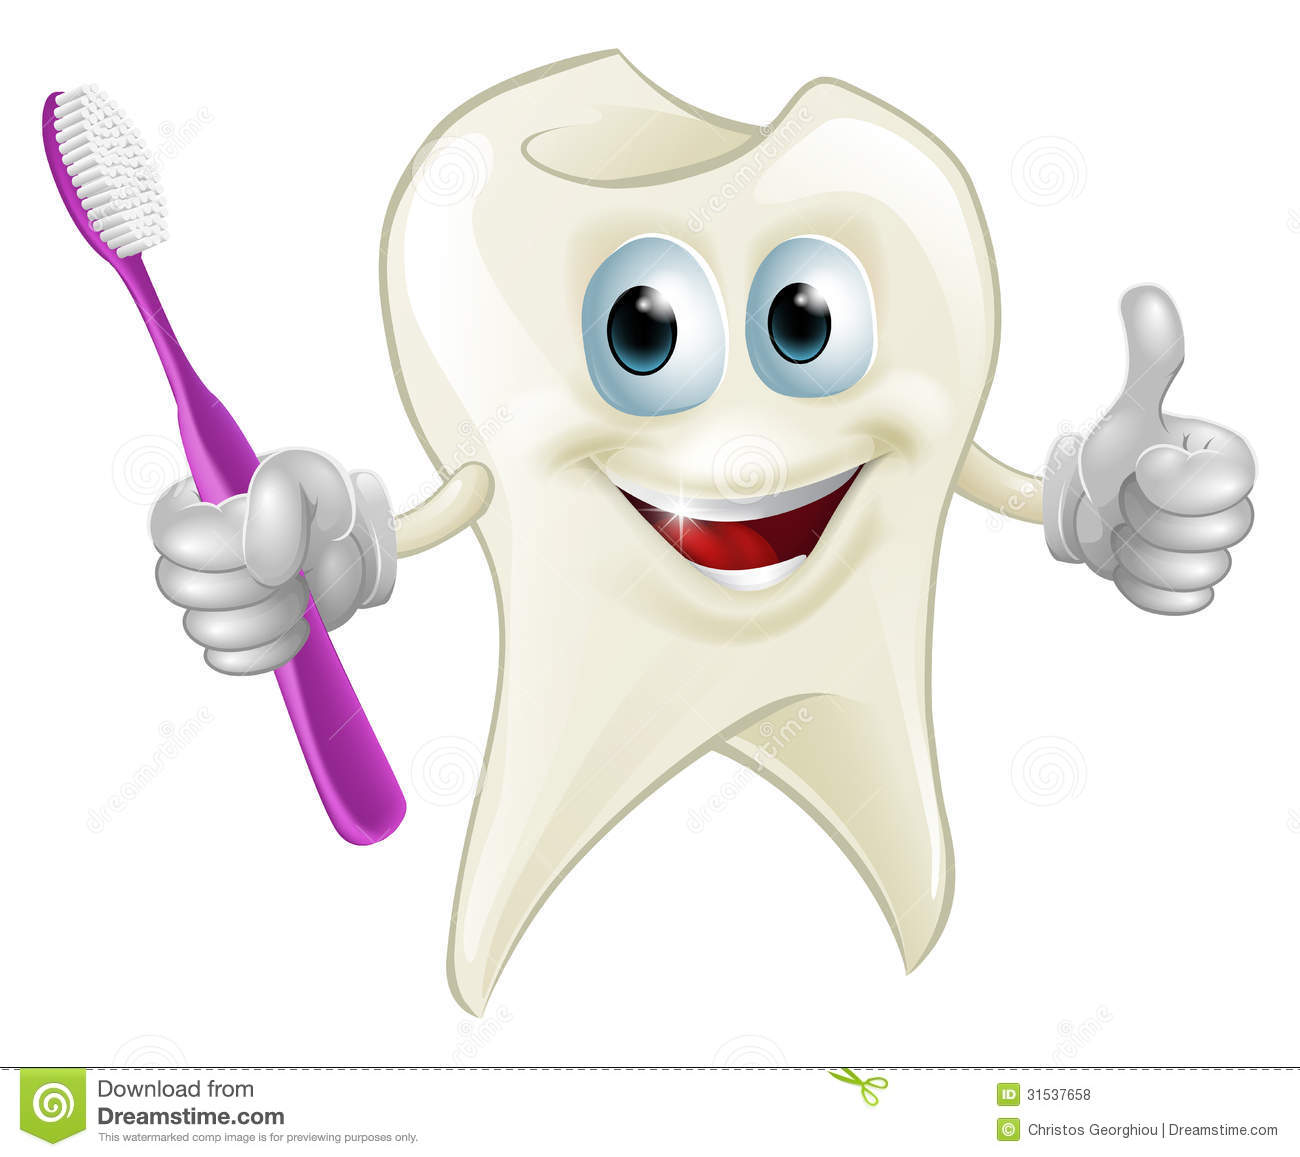 Tooth Man Holding A Toothbrush Royalty Free Stock Photos   Image